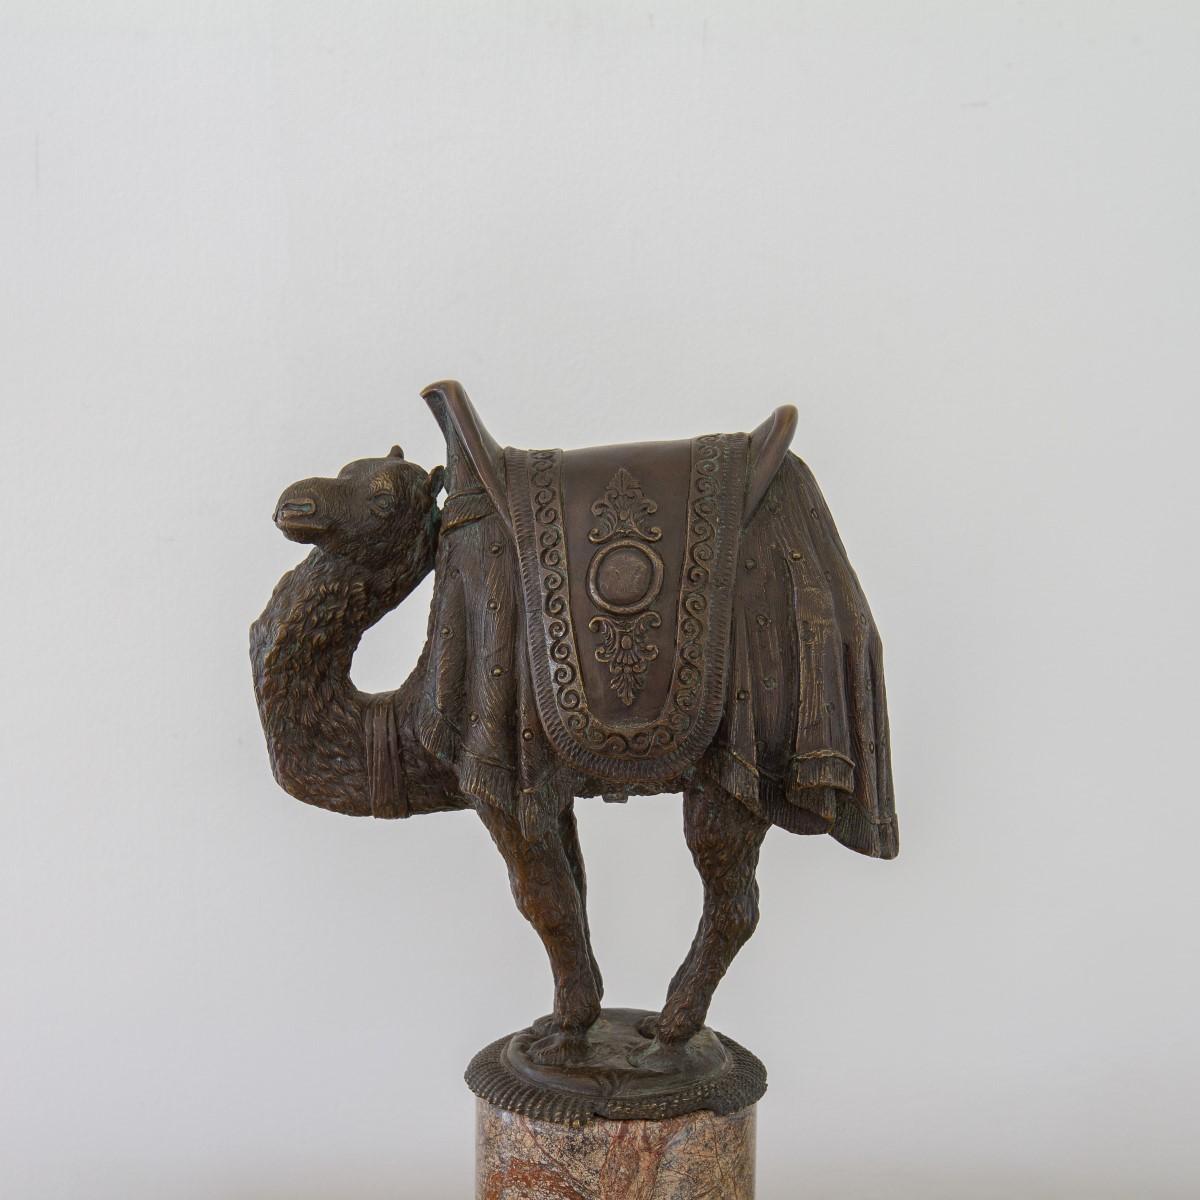 European Bronze Casting of a Camel on a 19th Century Marble Base